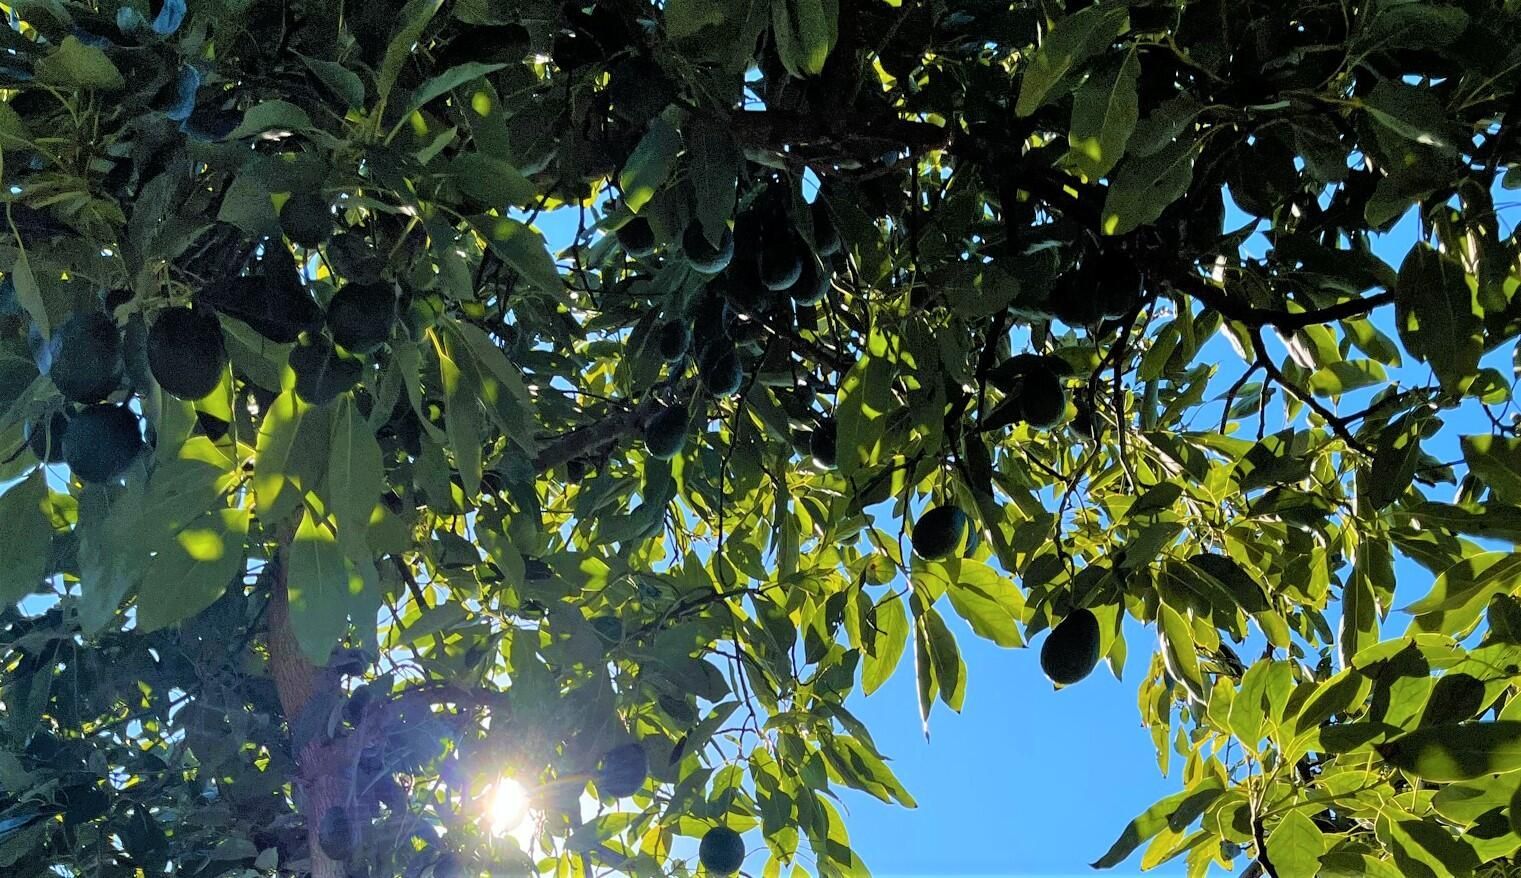 The sun shining through an avocado tree, with avocados hanging from branches